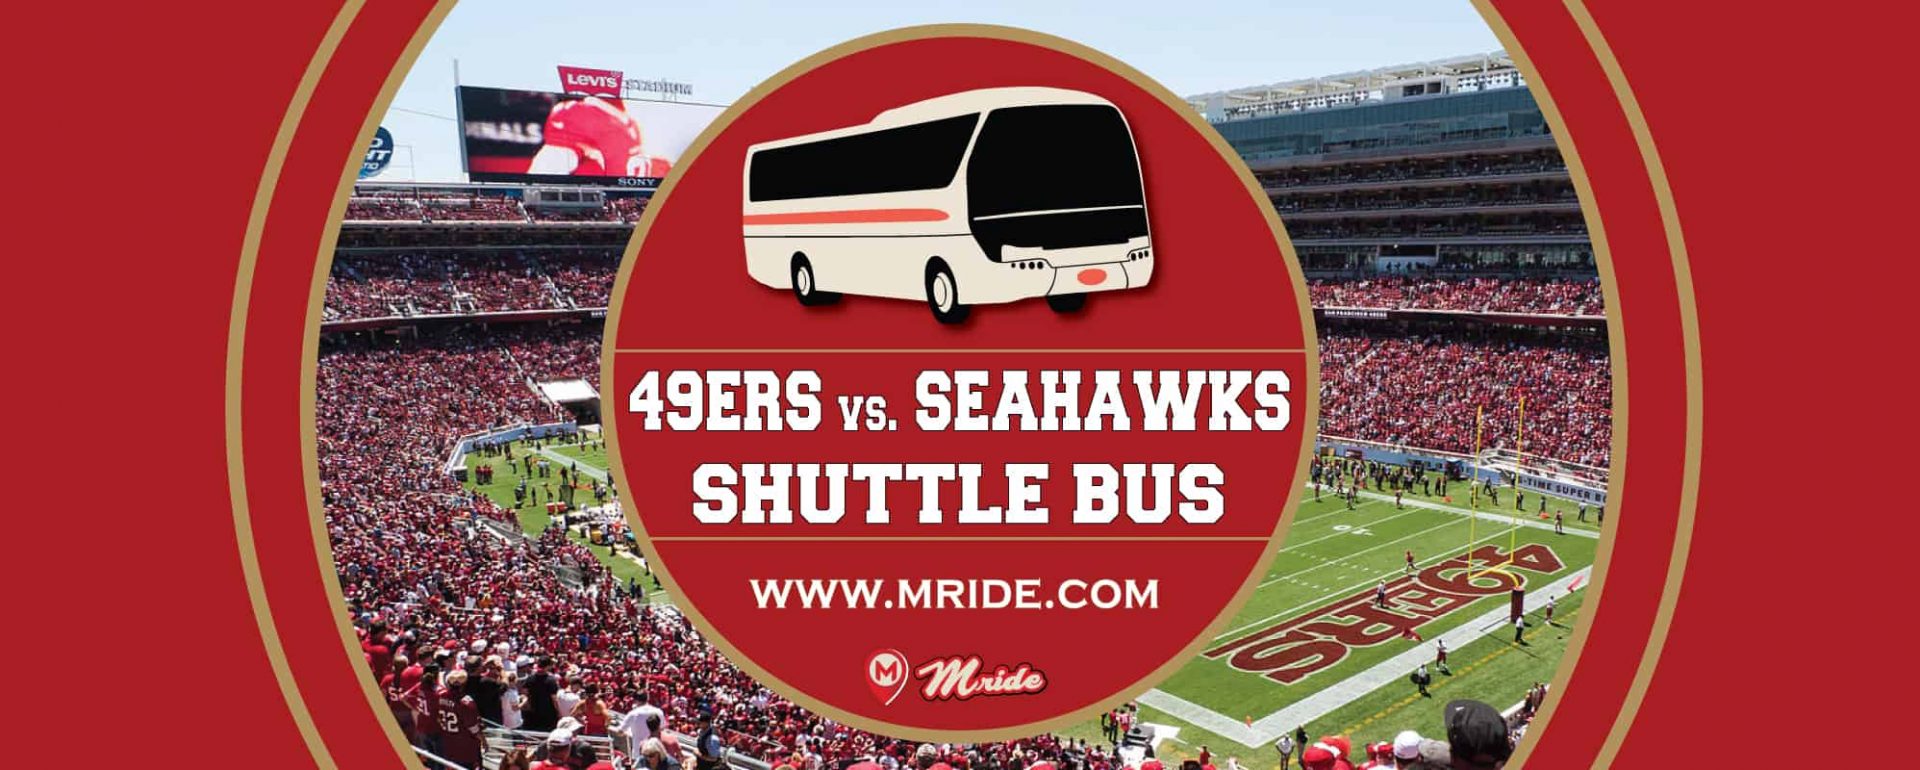 49ers vs. Seahawks Party Bus